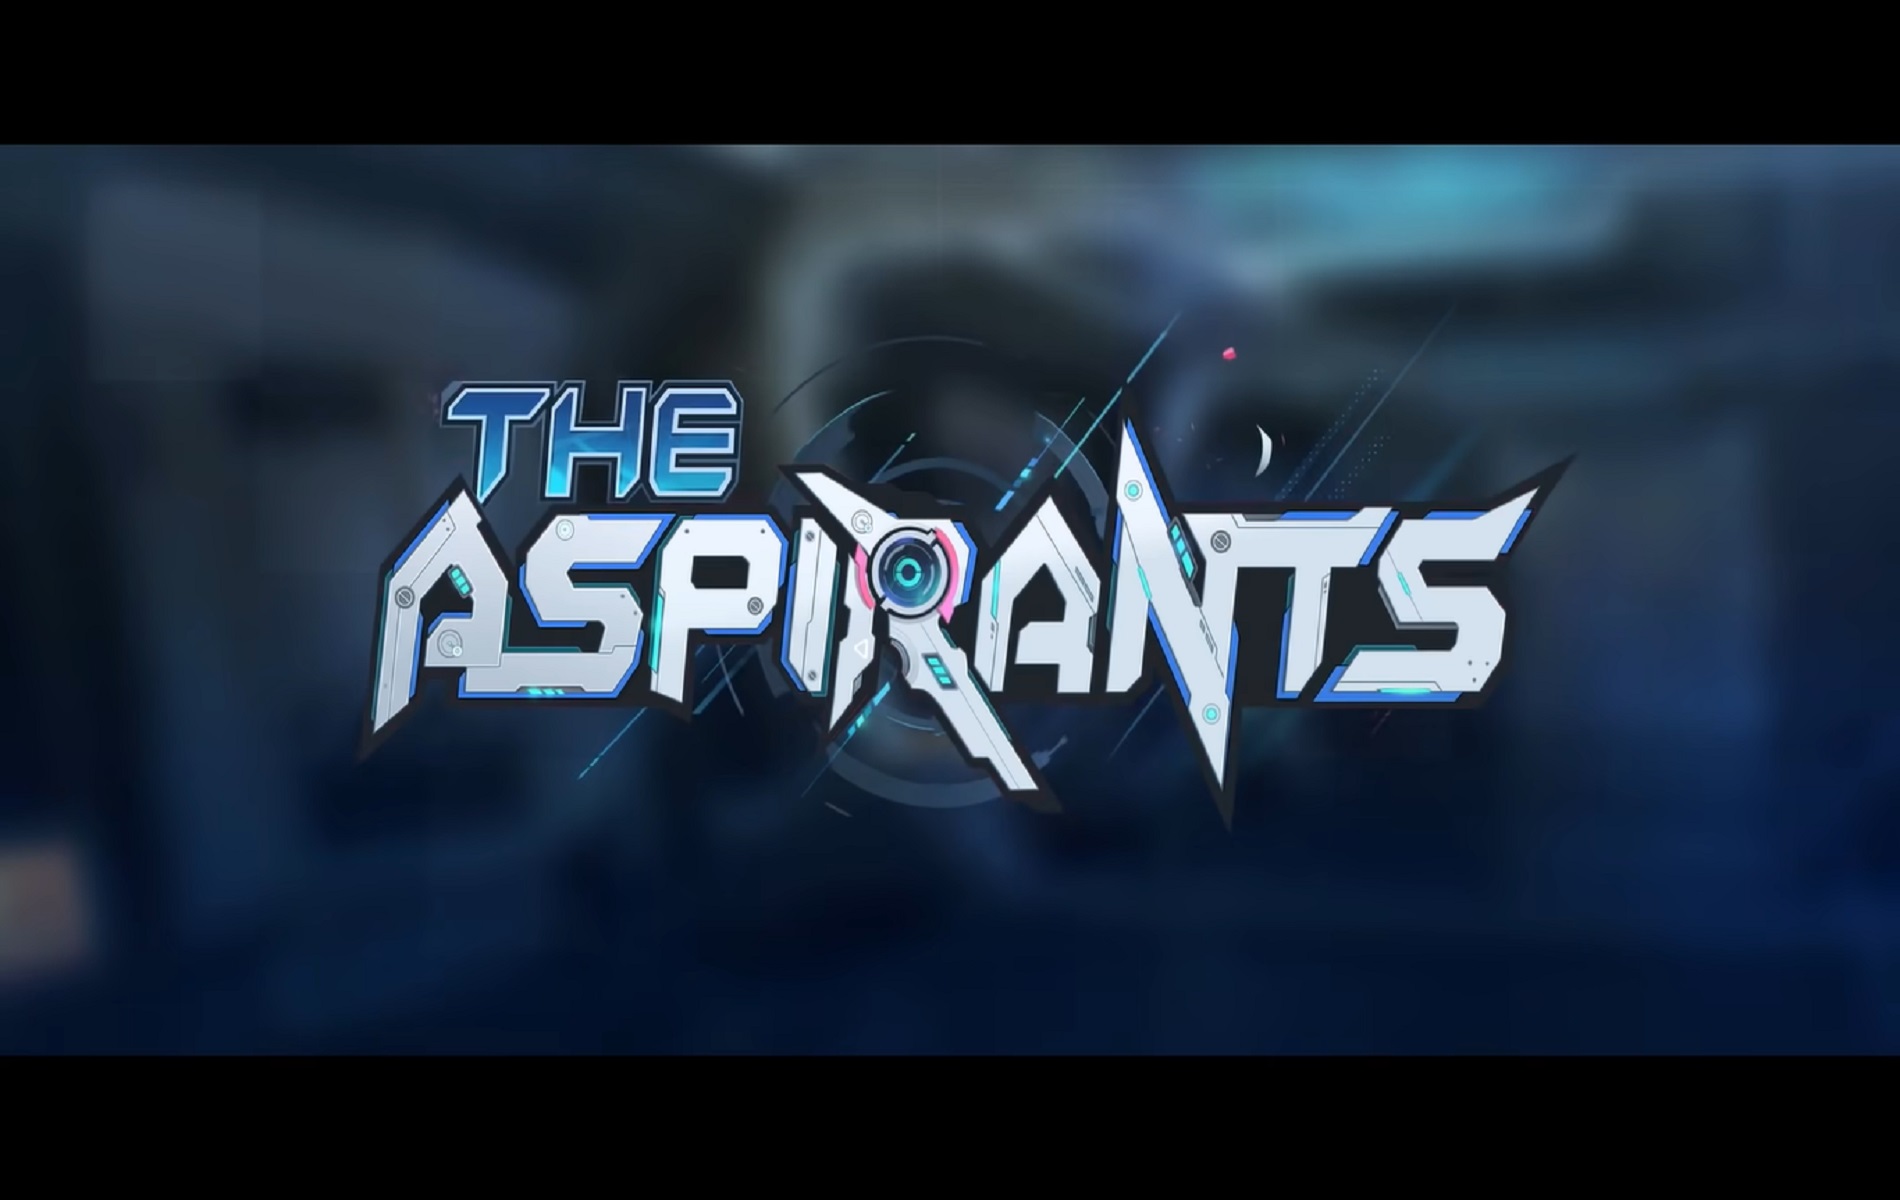 Mobile Legends' The Aspirants Anime Event: All You Need to Know